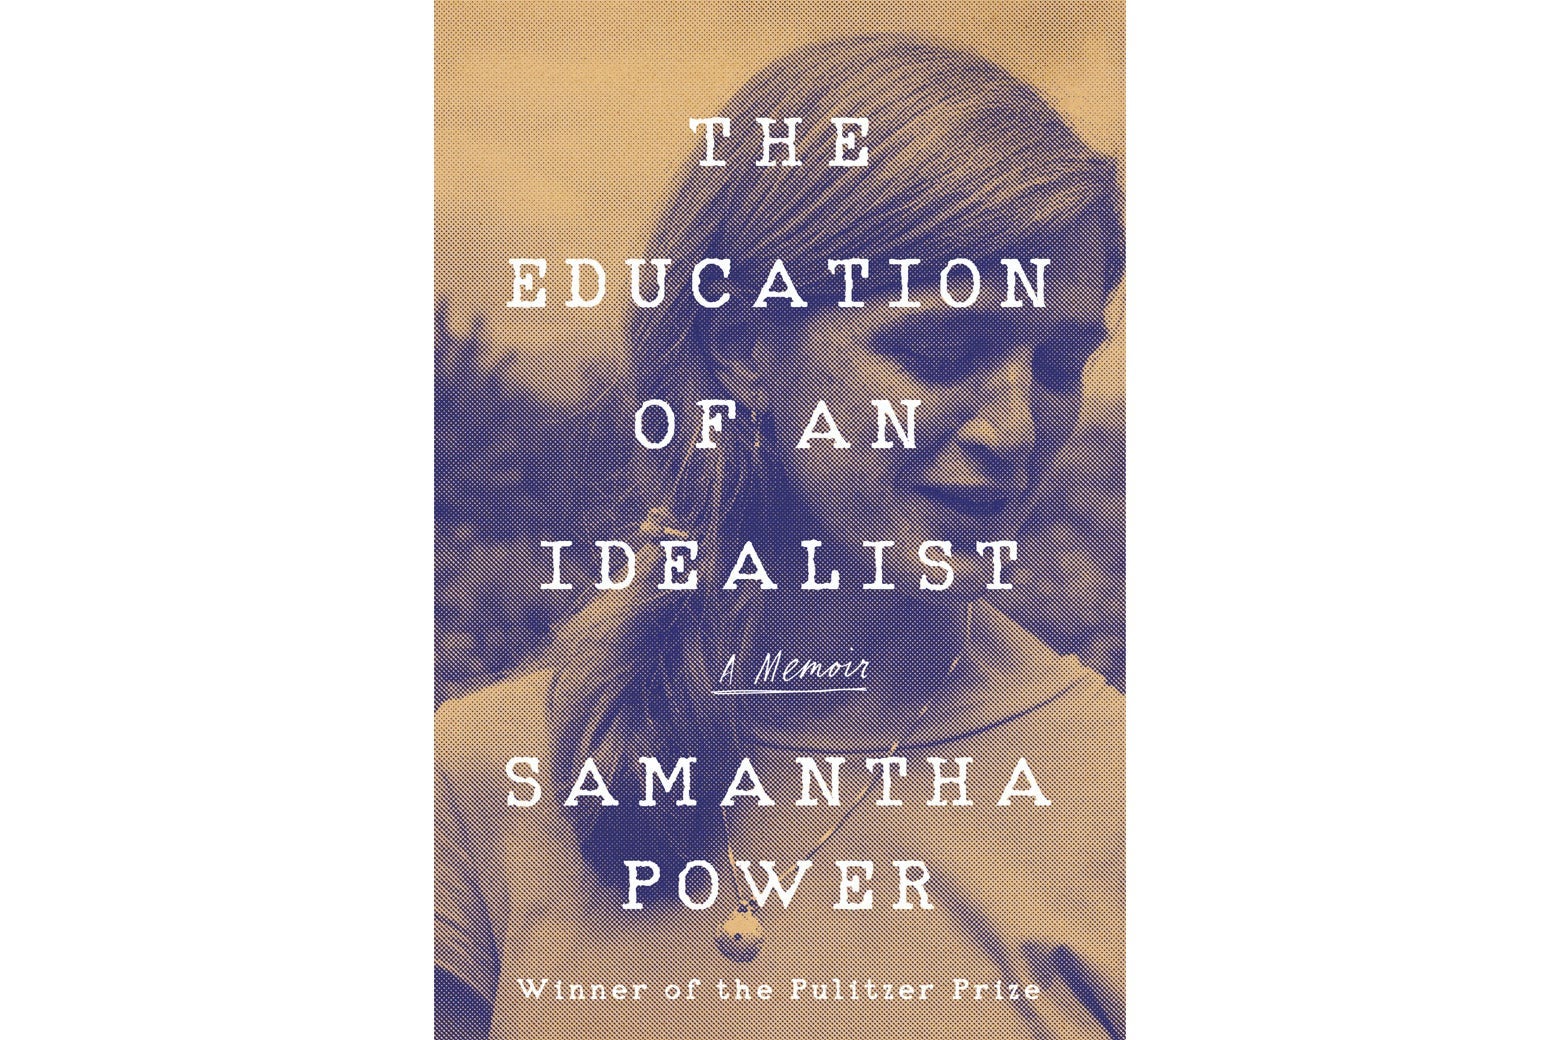 The Education of an Idealist book cover.